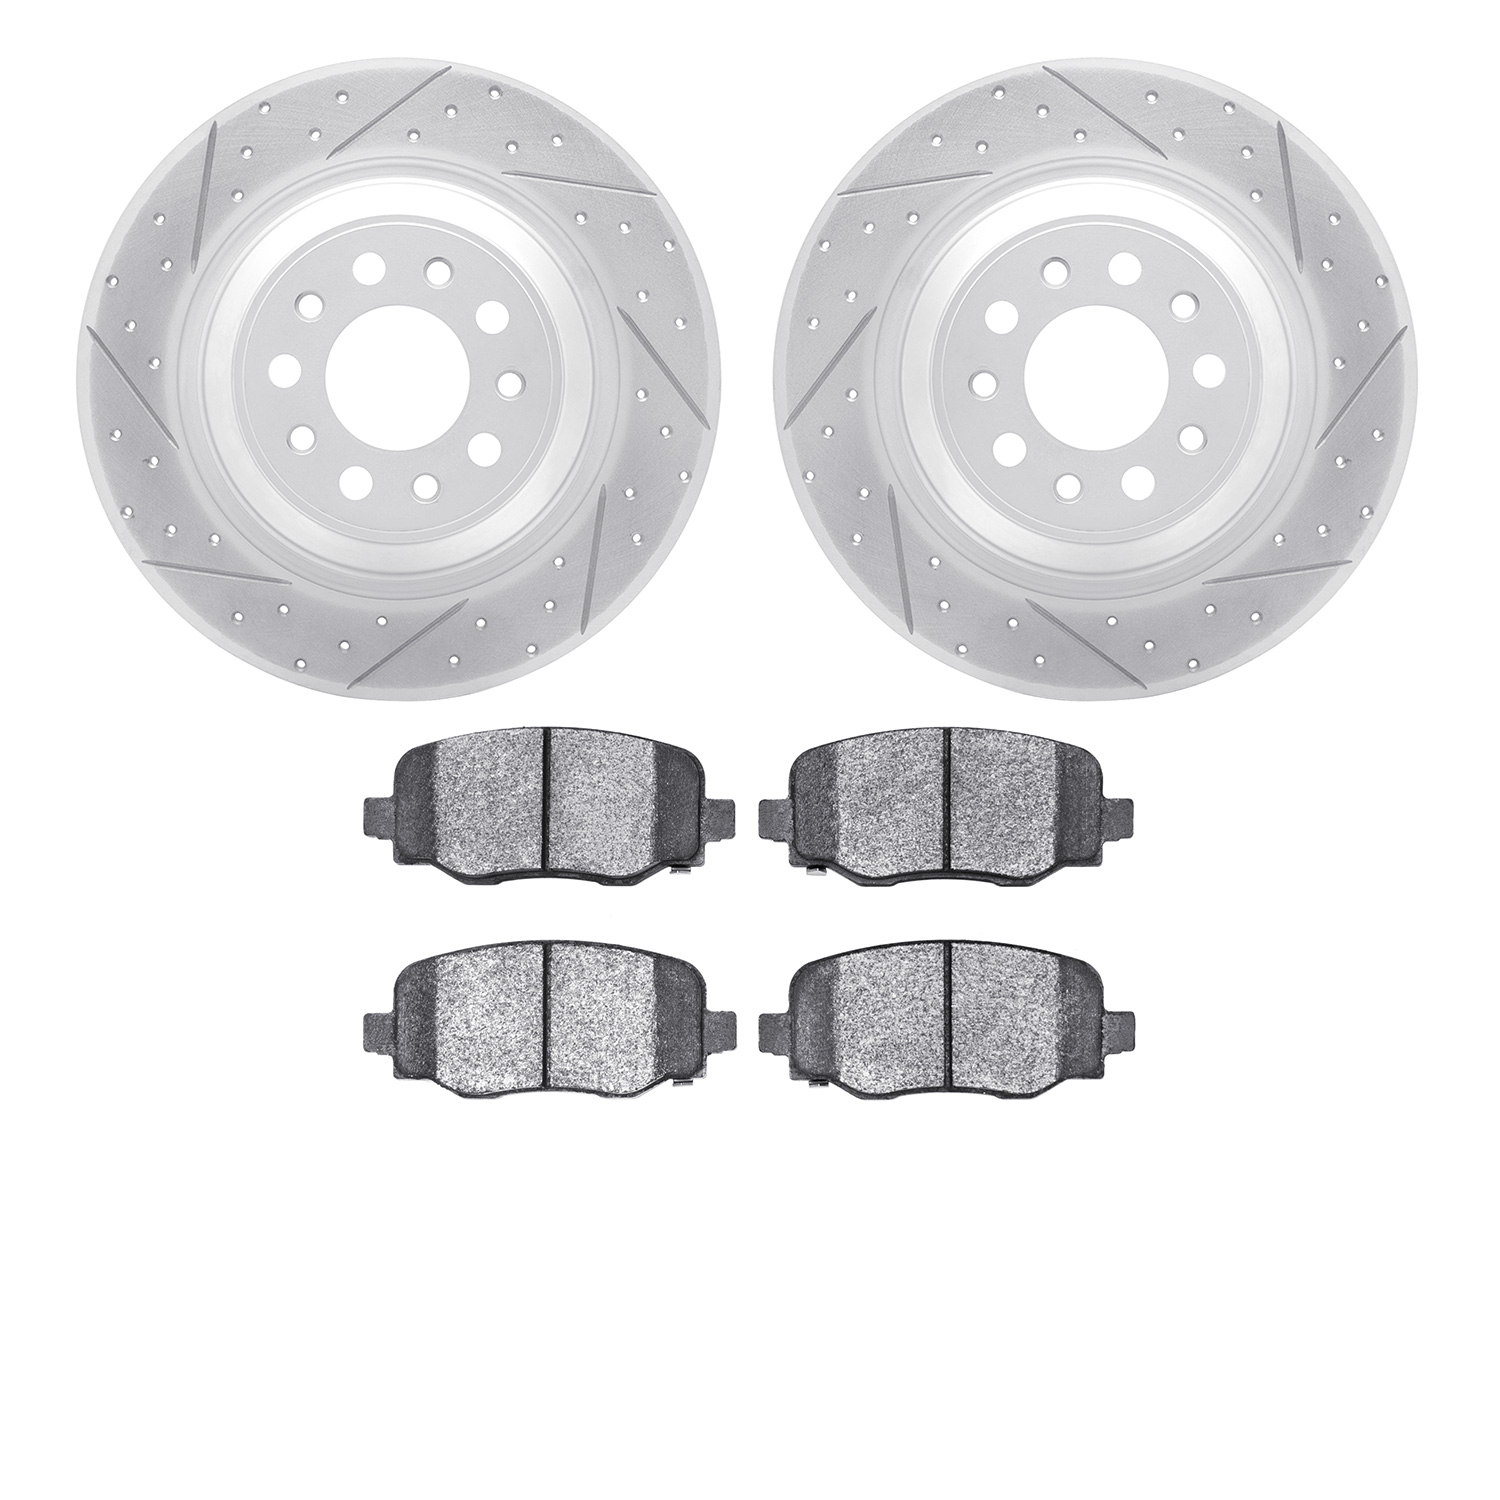 2502-42044 Geoperformance Drilled/Slotted Rotors w/5000 Advanced Brake Pads Kit, Fits Select Mopar, Position: Rear